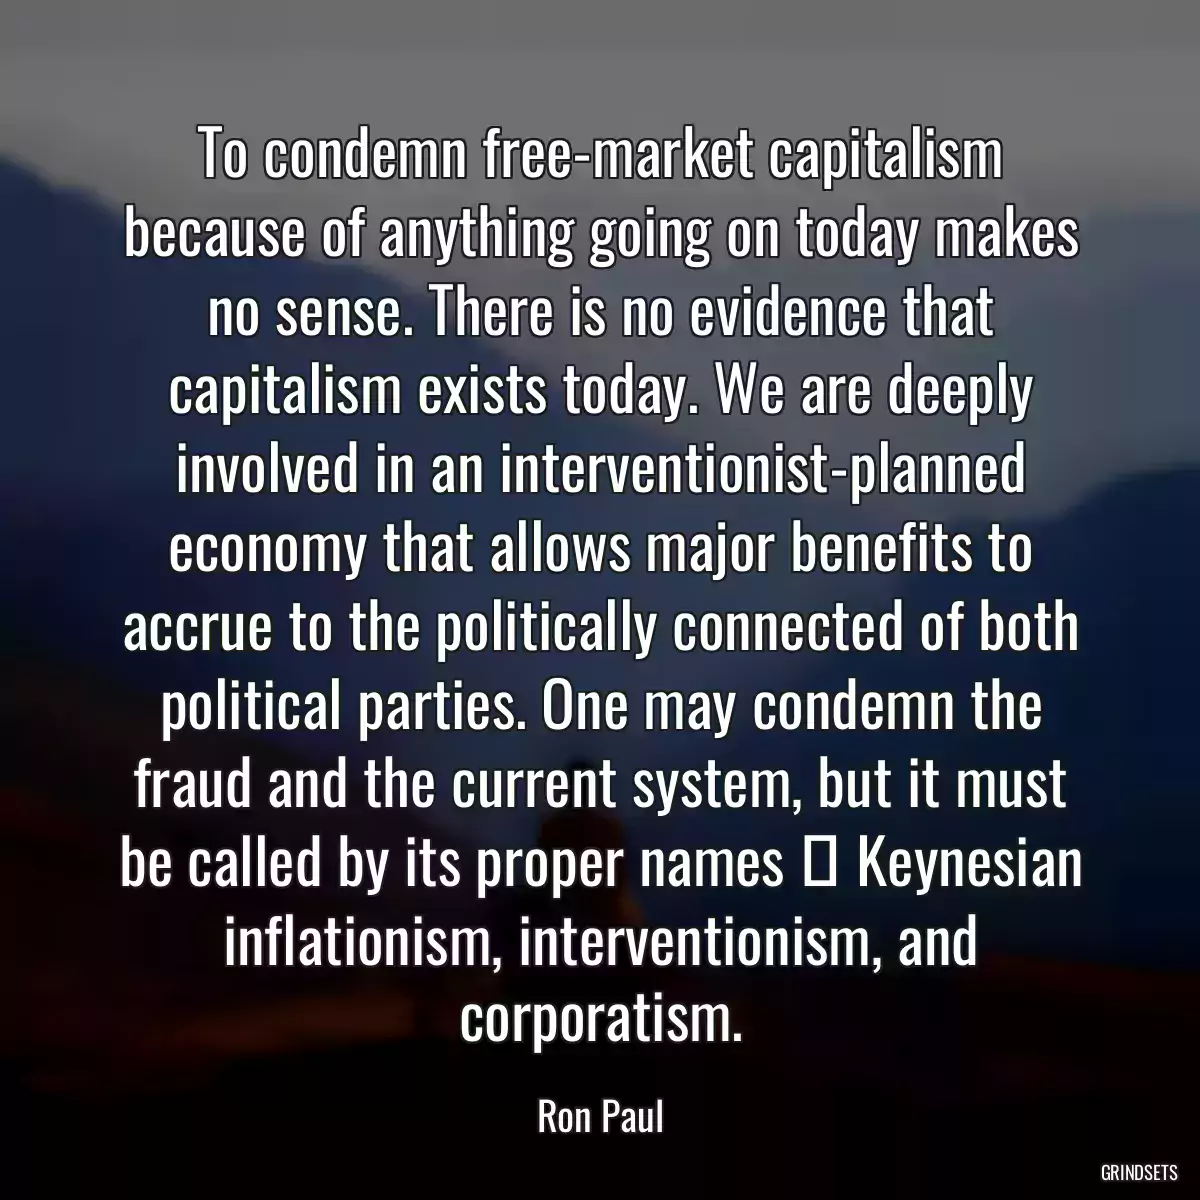 To condemn free-market capitalism because of anything going on today makes no sense. There is no evidence that capitalism exists today. We are deeply involved in an interventionist-planned economy that allows major benefits to accrue to the politically connected of both political parties. One may condemn the fraud and the current system, but it must be called by its proper names  Keynesian inflationism, interventionism, and corporatism.